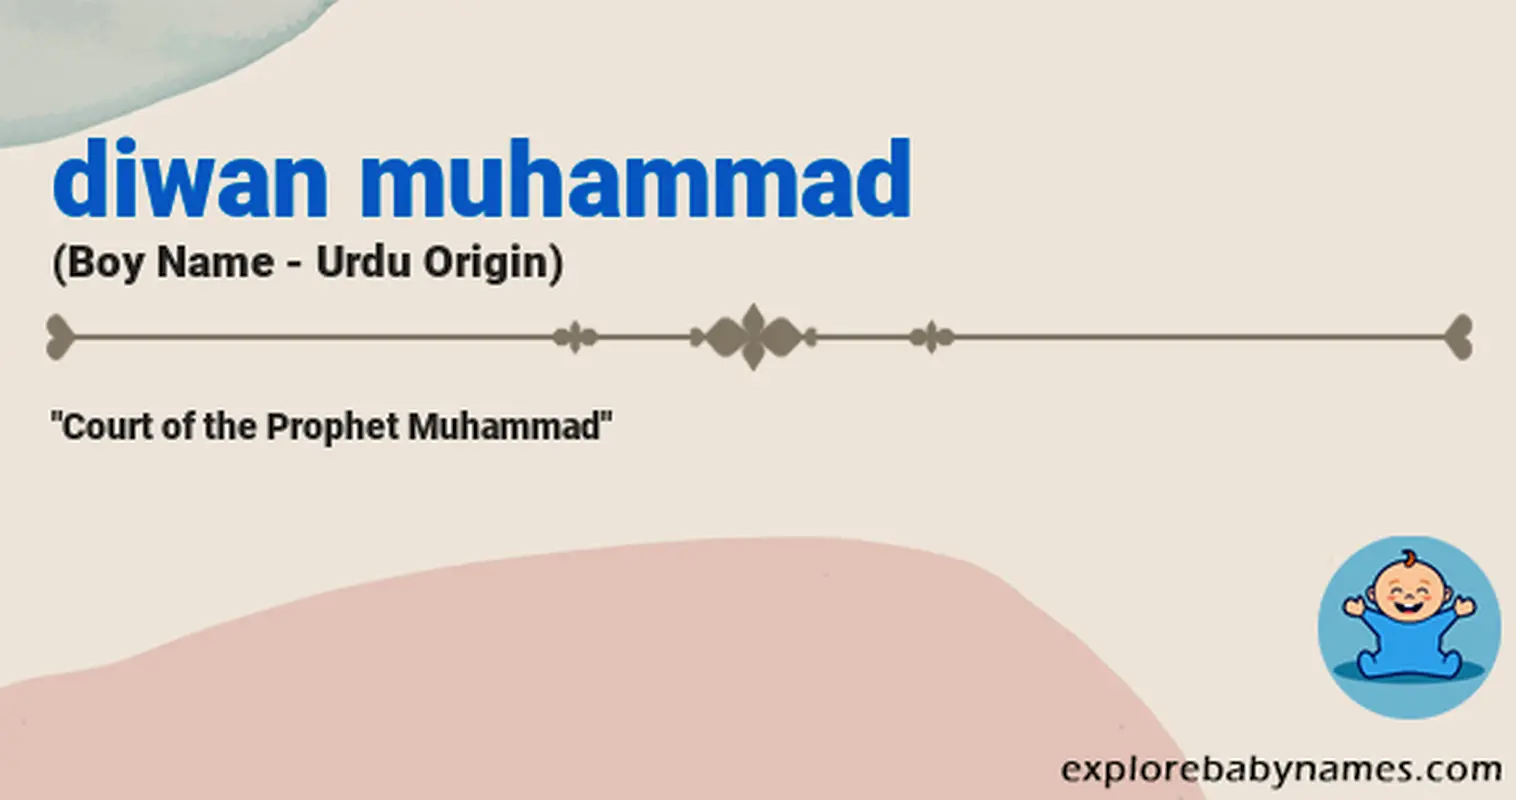 Meaning of Diwan muhammad